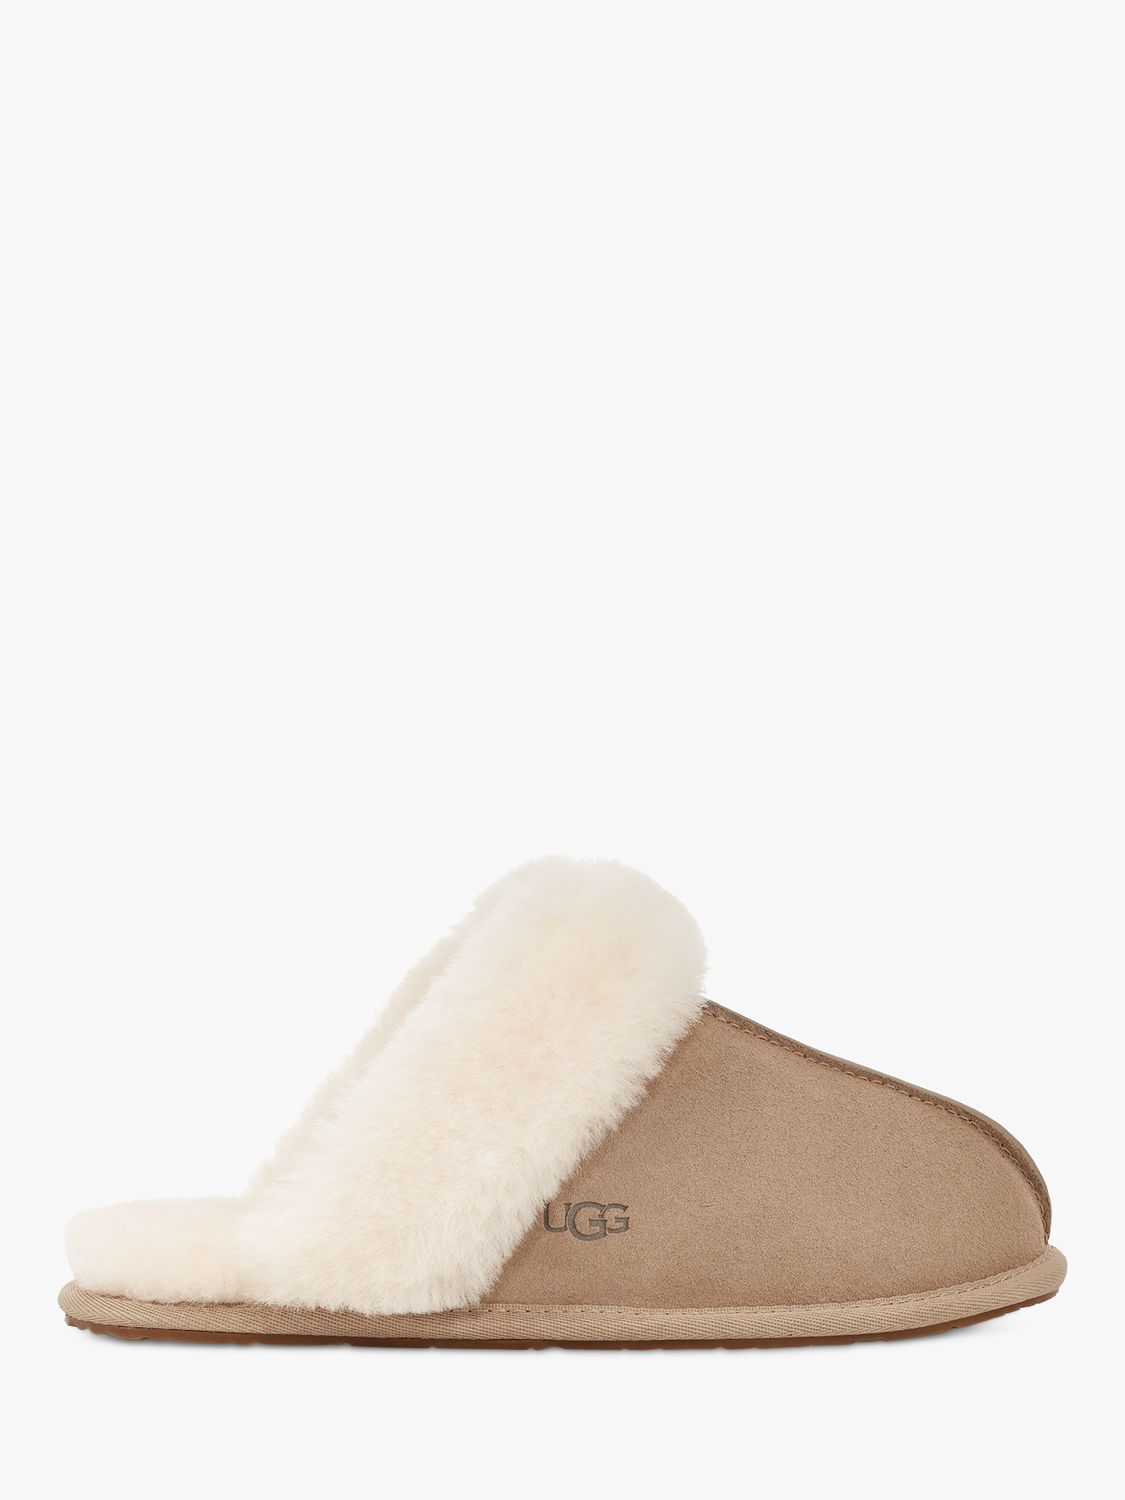 UGG Scuffette Sheepskin and Suede Slippers, Mustard Seed Beige at John ...